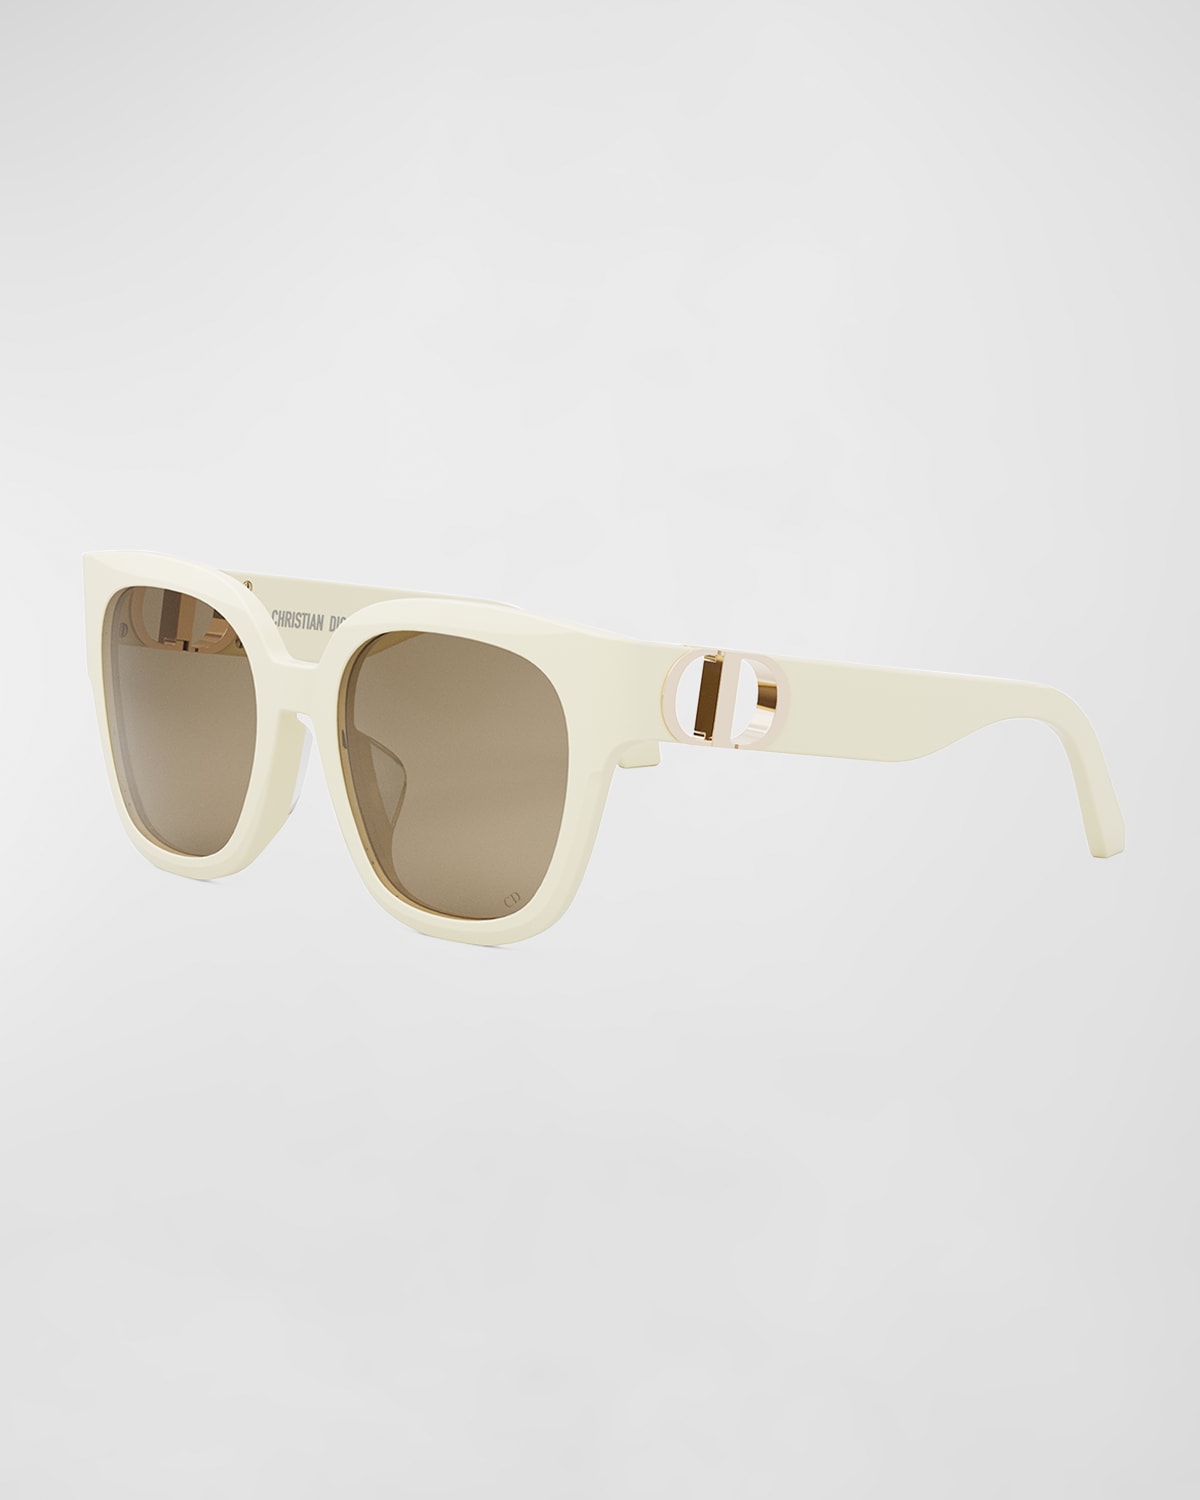 Dior 30montaignw S10f Sunglasses In Ivory Brown Mirro